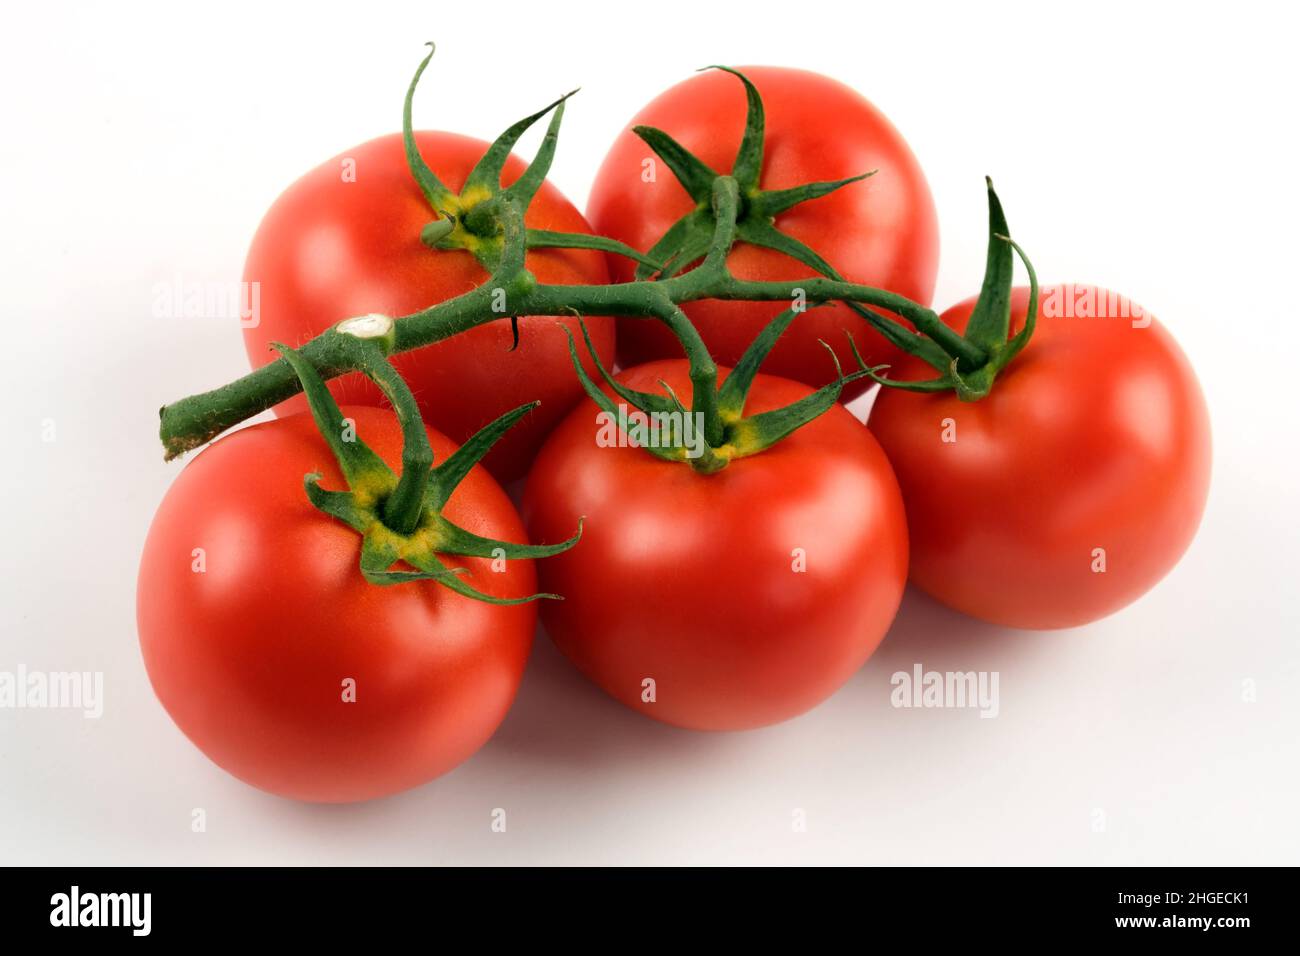 Close up shot of cluster tomatoes on a white background Stock Photo